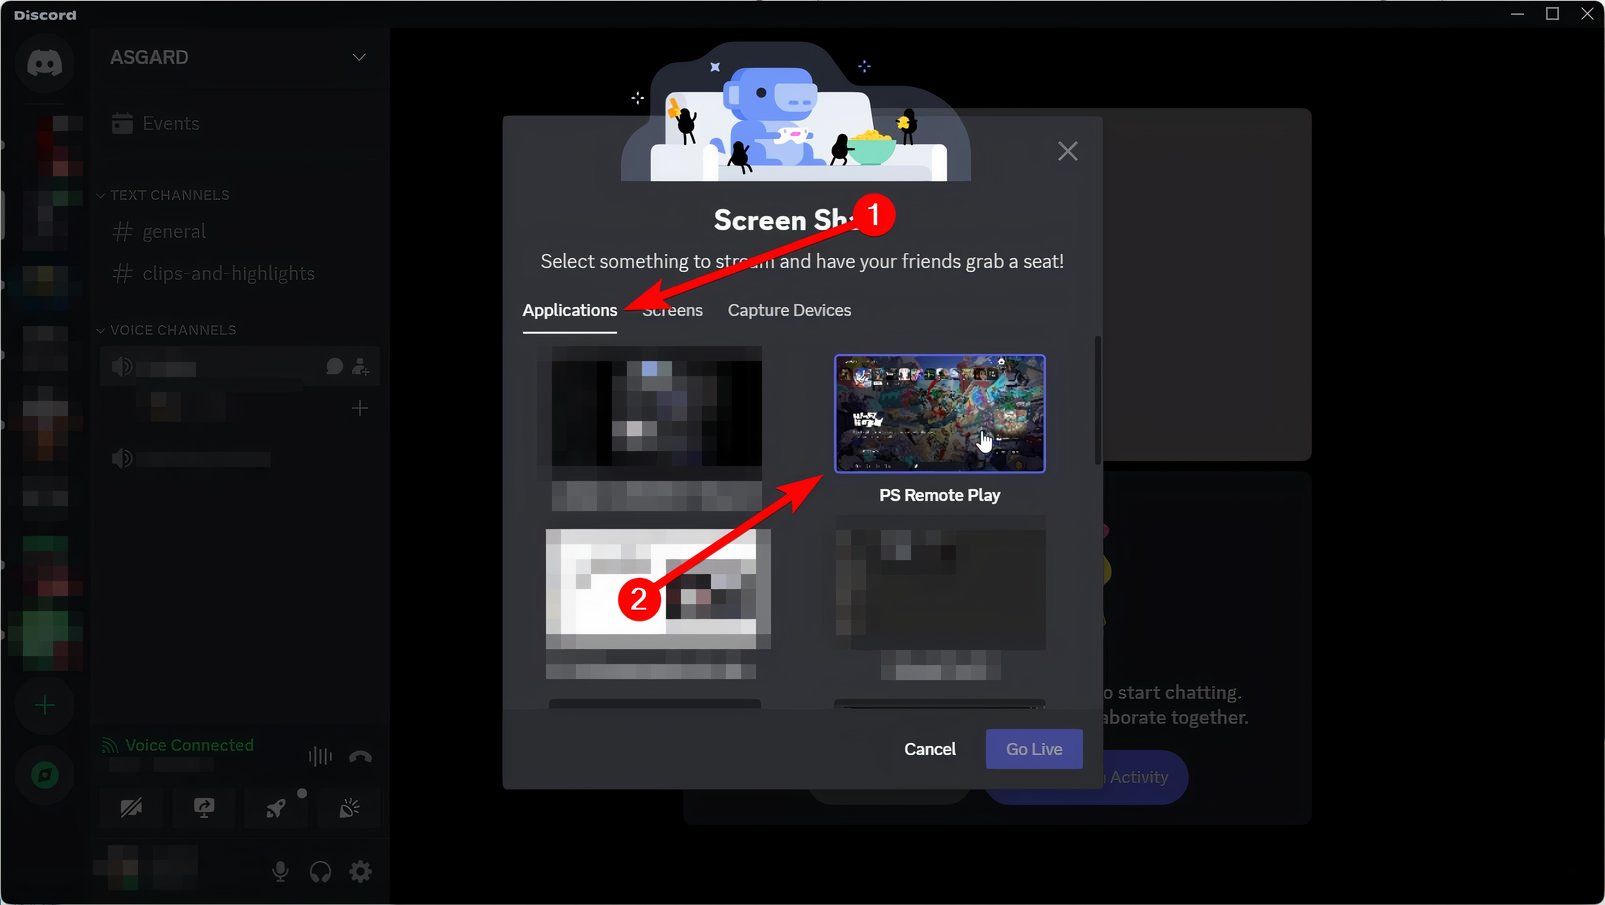 Sharing the PS Remote Play application window on Discord.